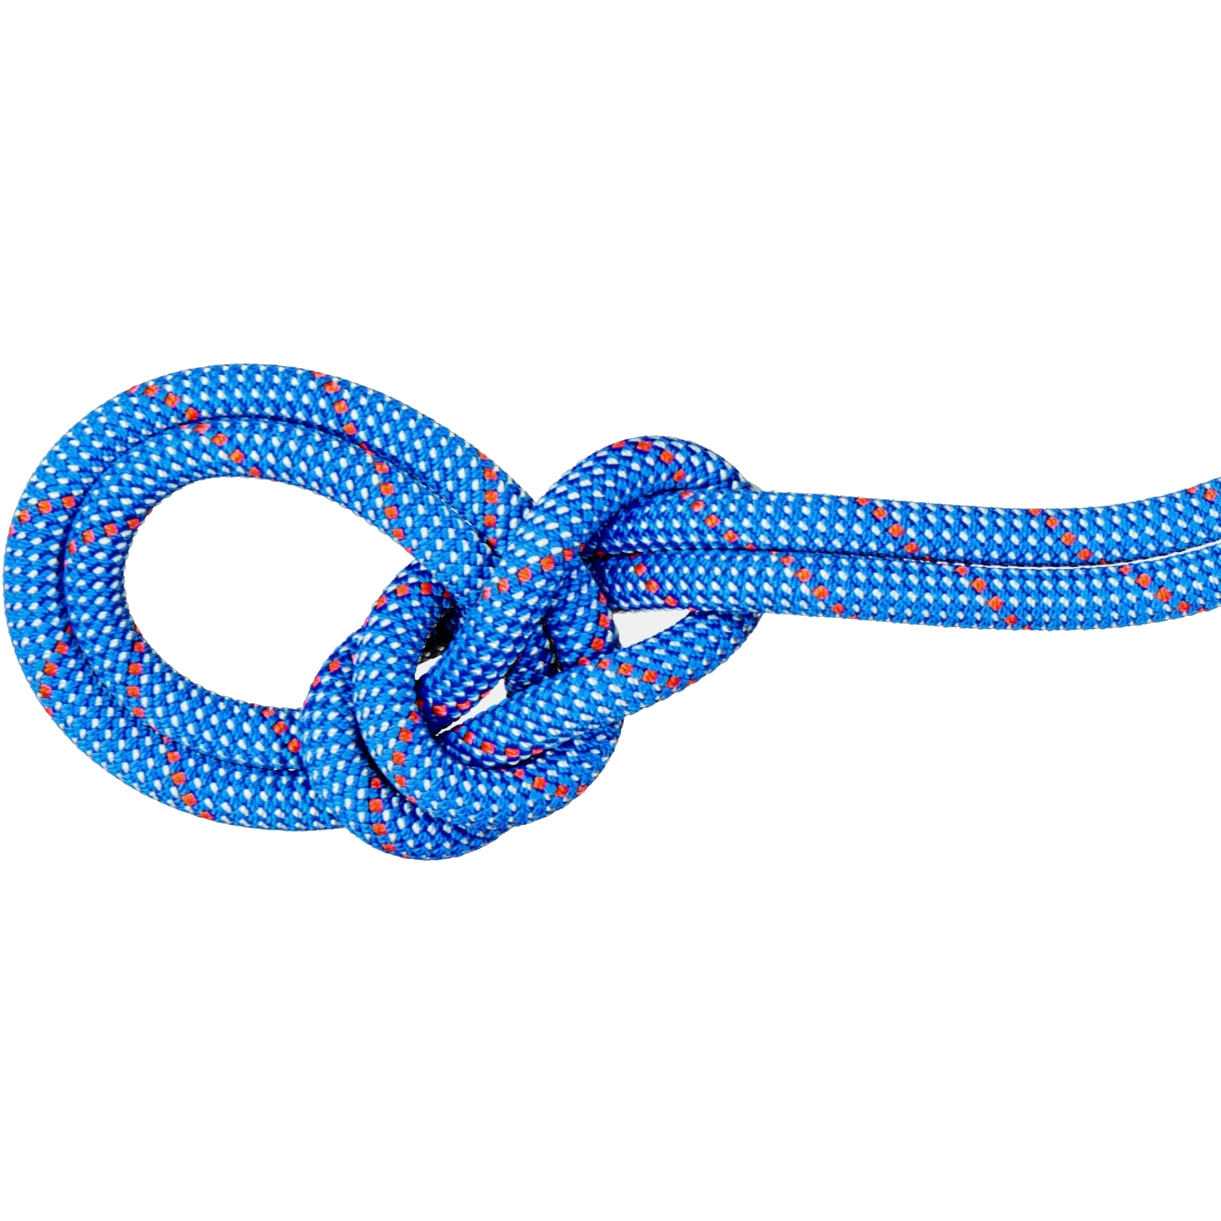 Picture of Mammut 9.5 Crag Classic Rope - 70m - blue-white